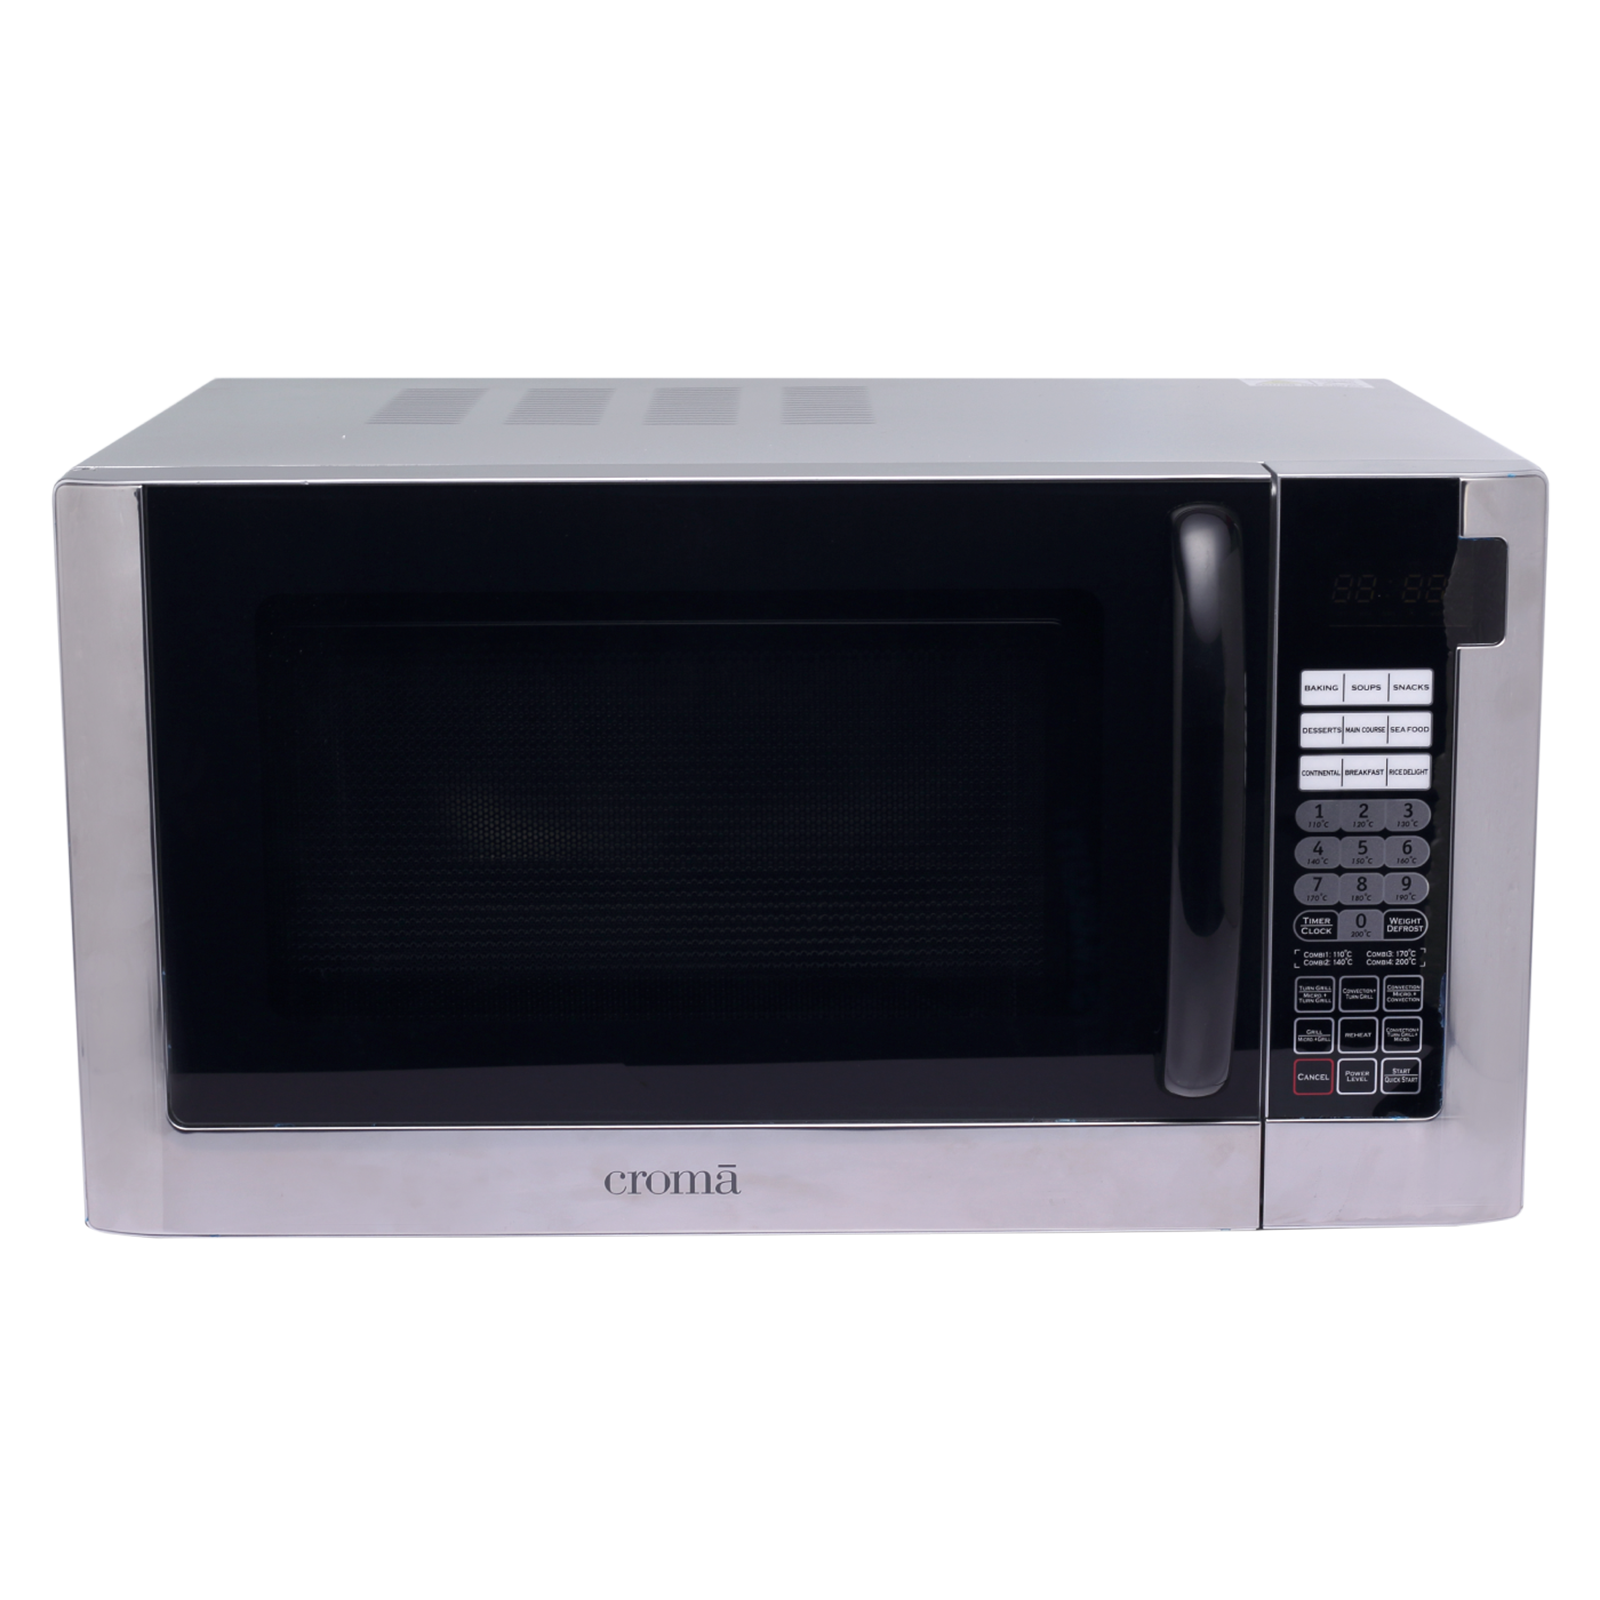 Croma Retail - Croma 30 Litres Convection Microwave Oven (Barbeque Function, CRAM0192, Silver)